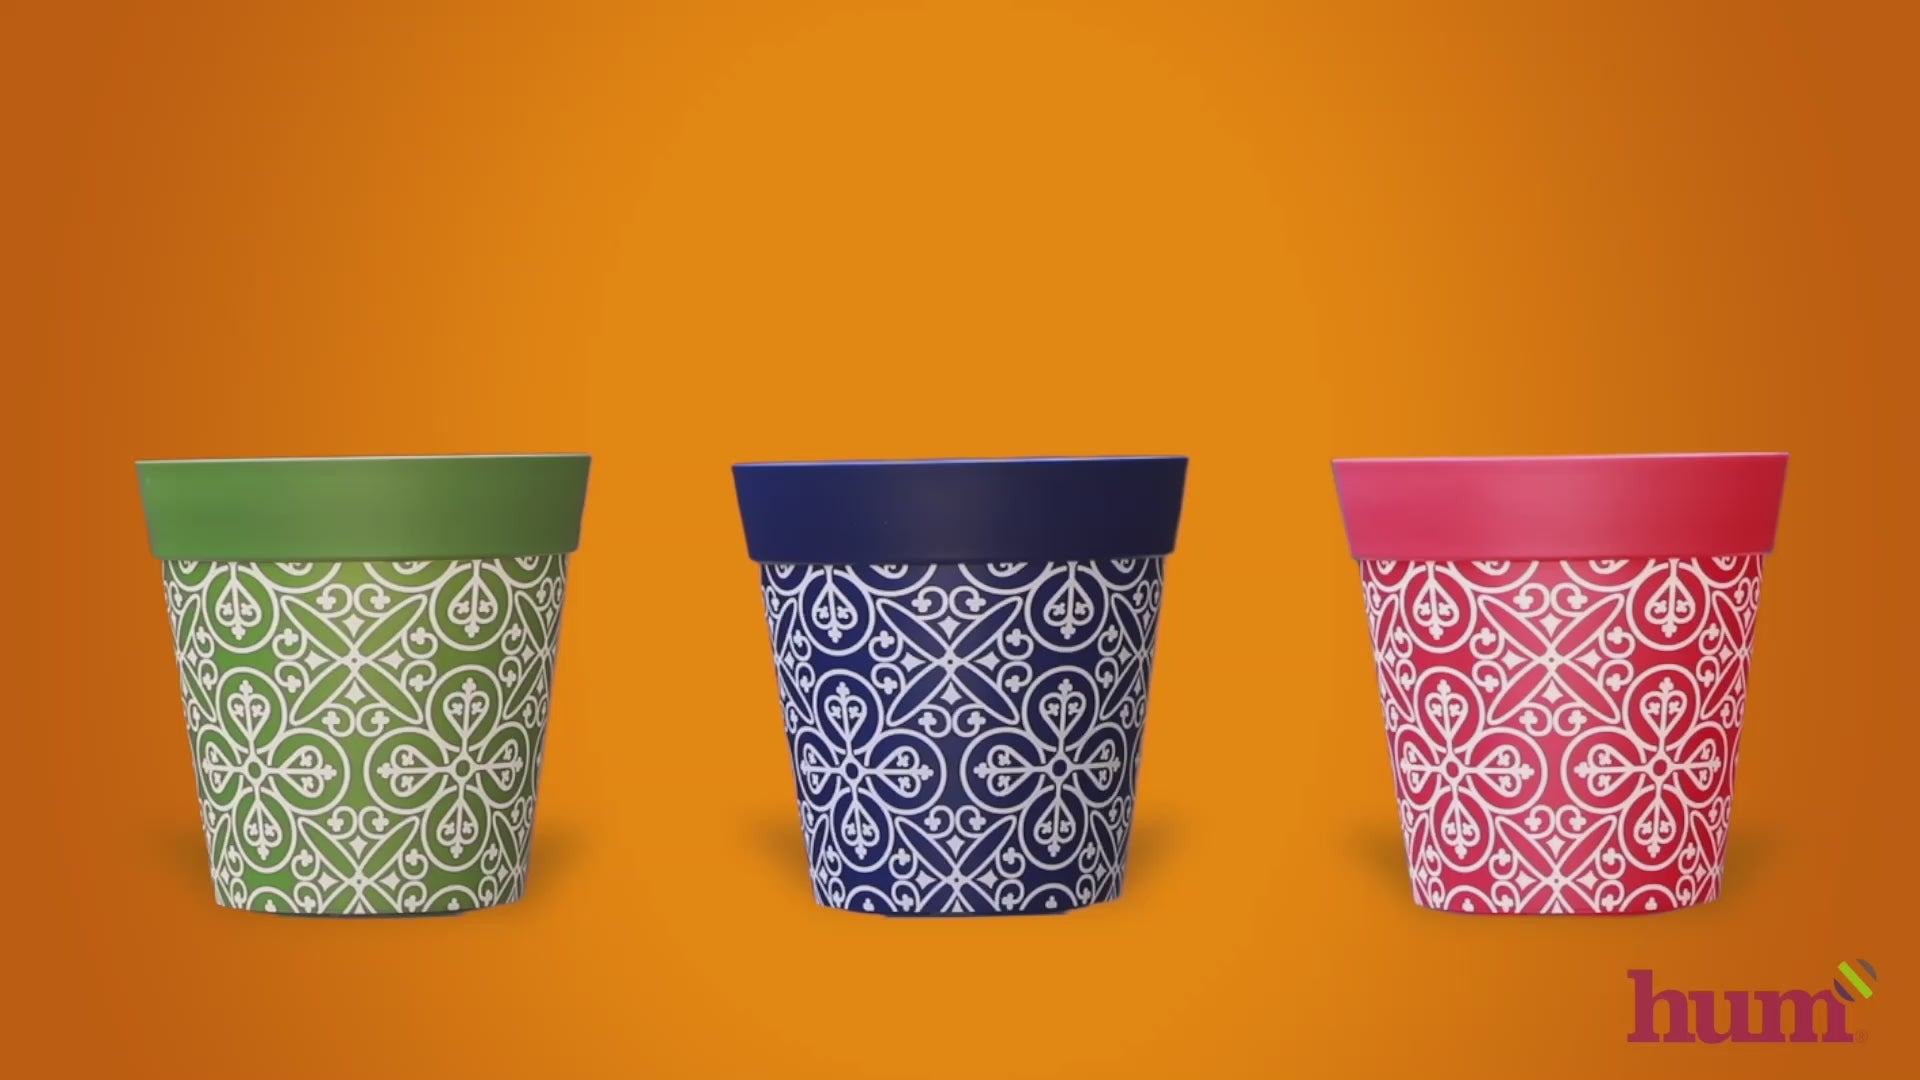 Fun video showing all our colourful Hum flowerpots